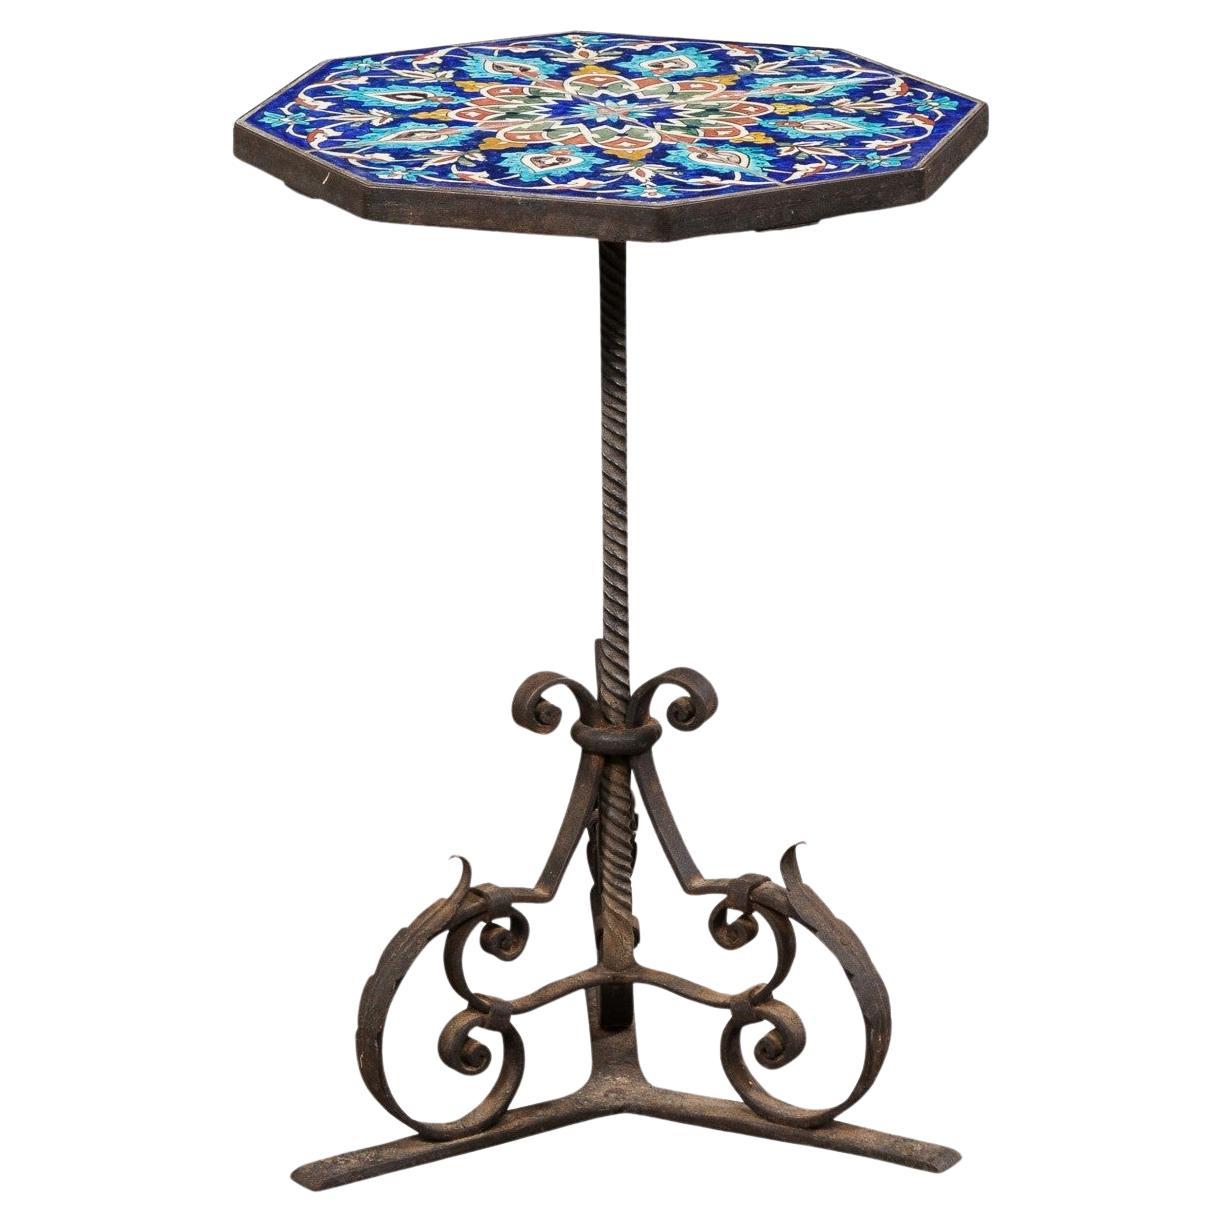 Spanish Iron Drinks Table with Tile Top For Sale